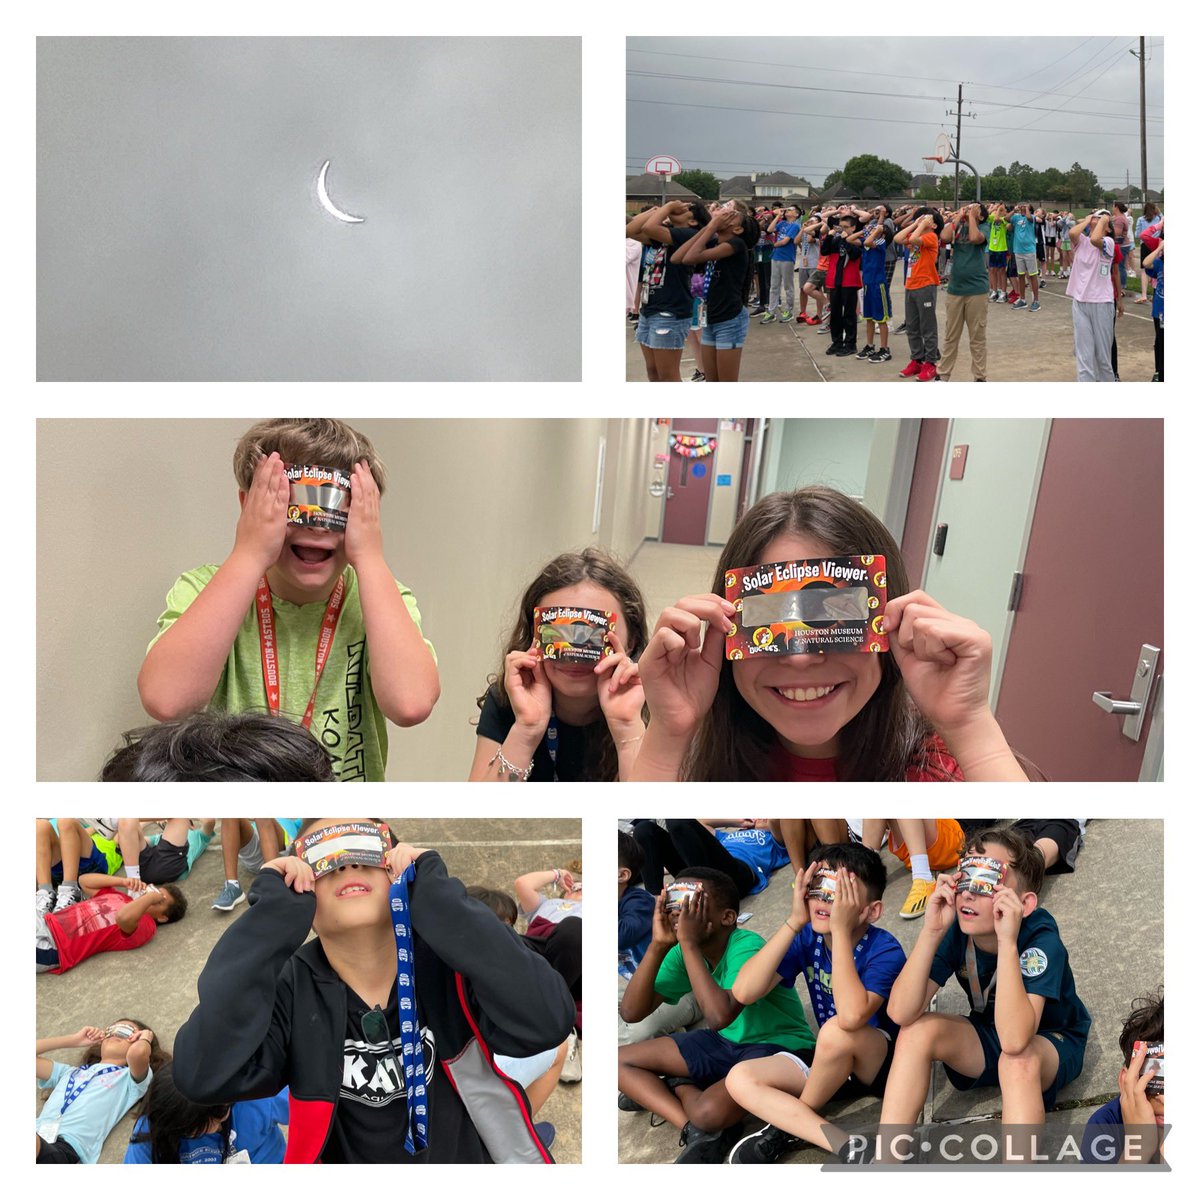 Our 5th grade @okekoalas got some shade in the afternoon, even the clouds could not keep the #eclipse from peaking through. @katyisd @malynn_r #2024eclipse #okeisagreatplacetobe @oke5thgrade